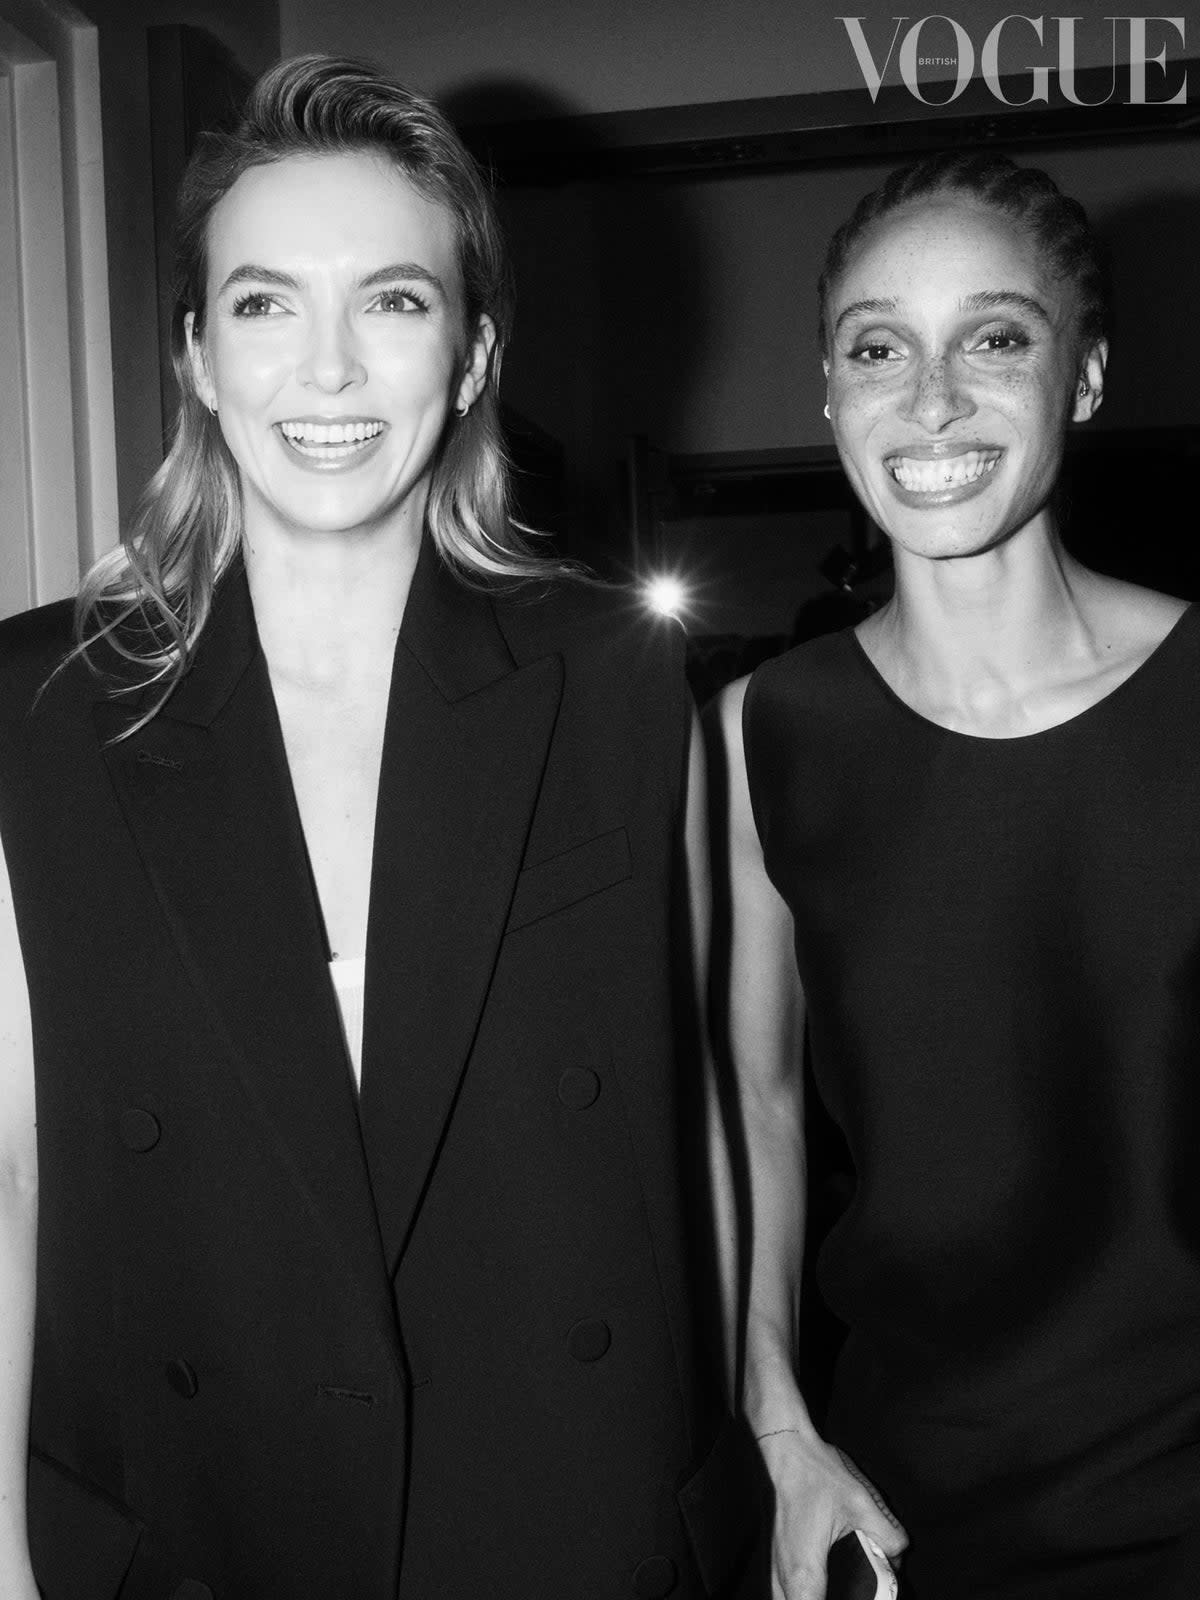 Jodie Comer with Adowa Aboah, Enninful’s first Vogue cover star in 2017 (Ned Rogers)